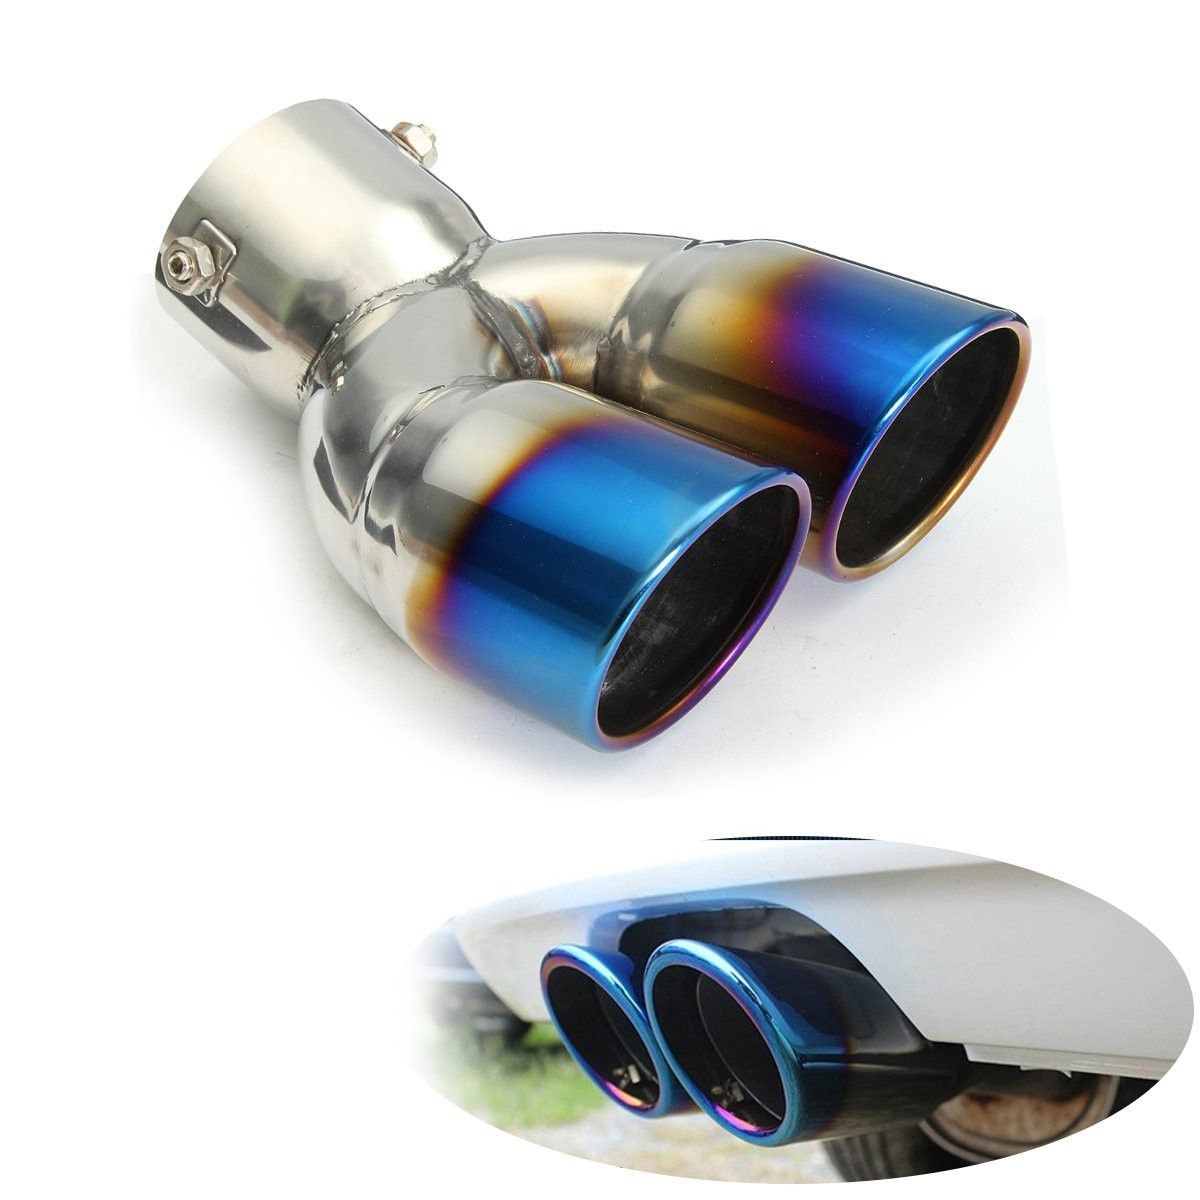 Universal-Bluing-Exhaust-Muffler-Silencer-Dual-Tail-Pipe-Tips-58-70mm-Inlet-1409592